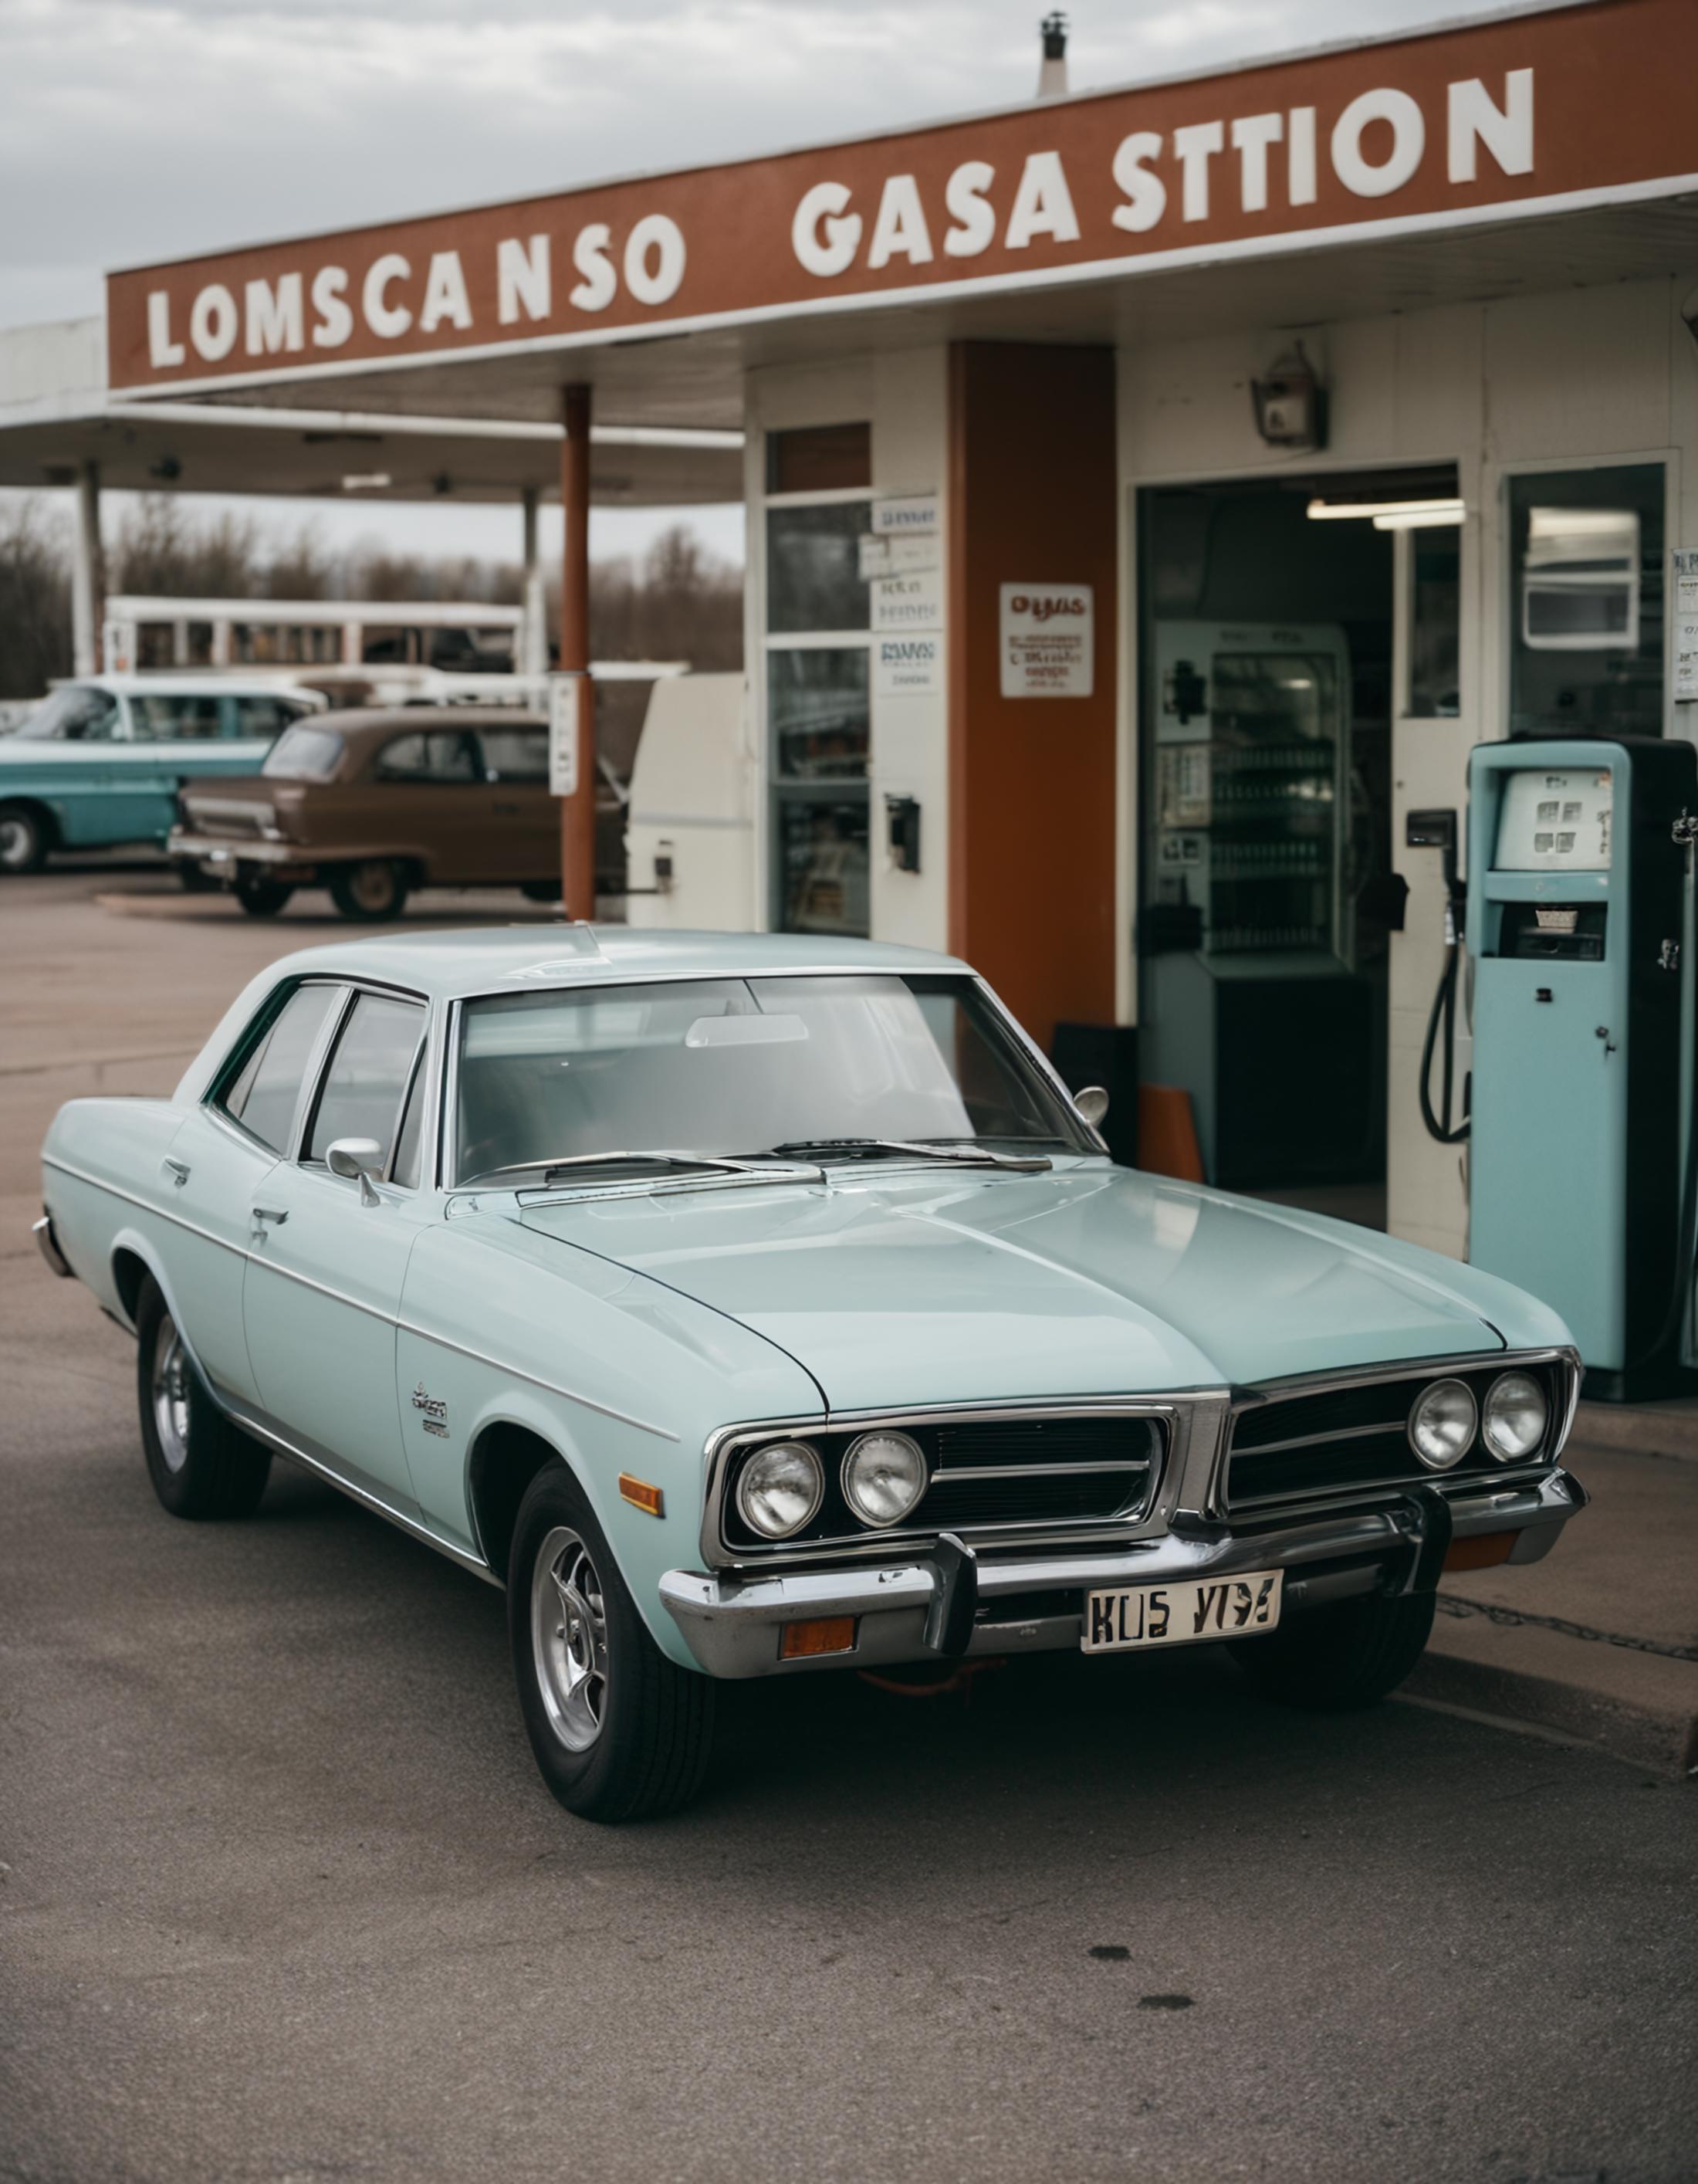 A vintage blue car parked at a gas station.